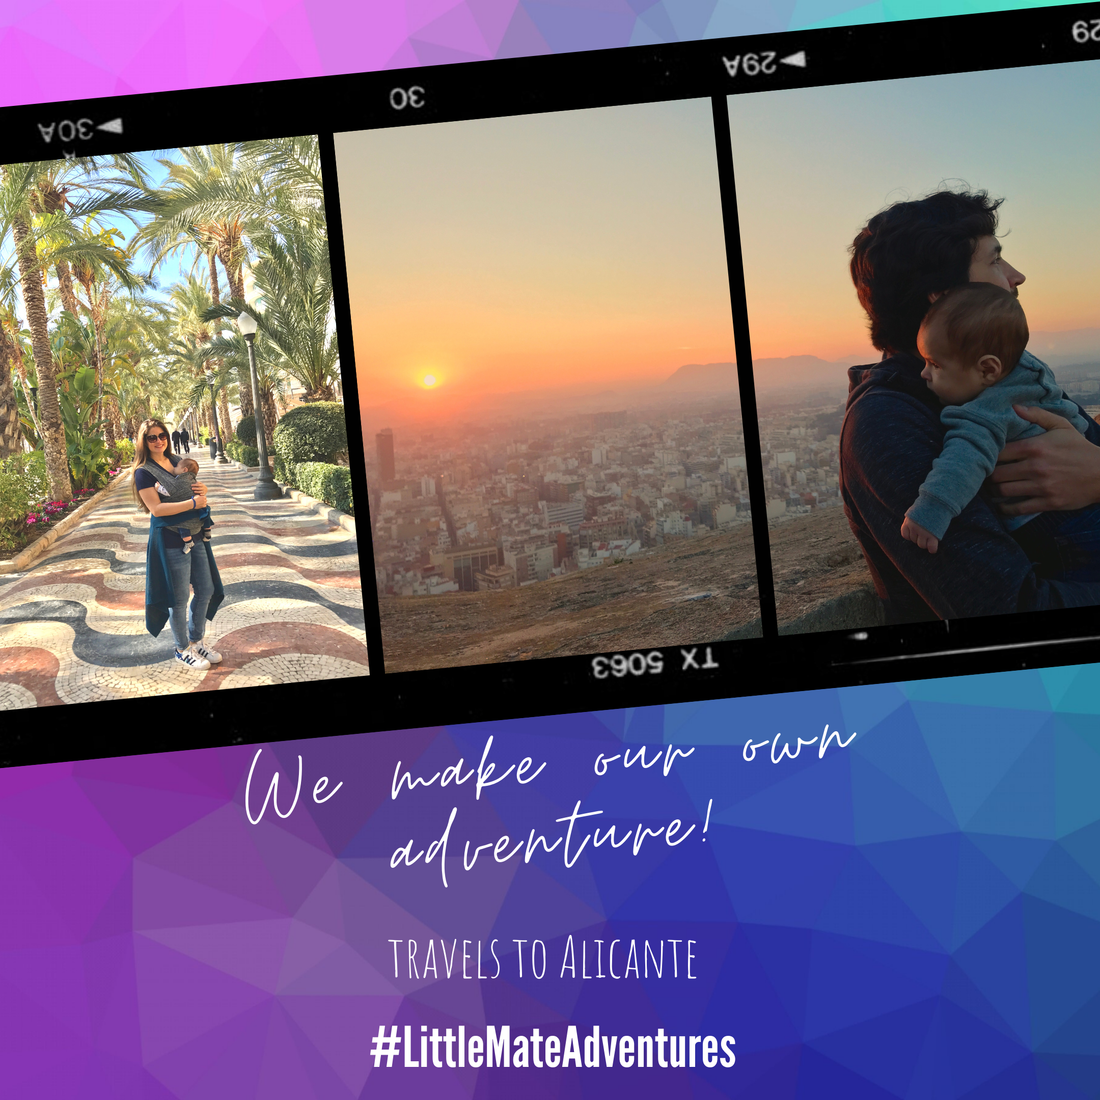 Little Mate Adventures: Travels to Alicante! - Little Mate Adventures